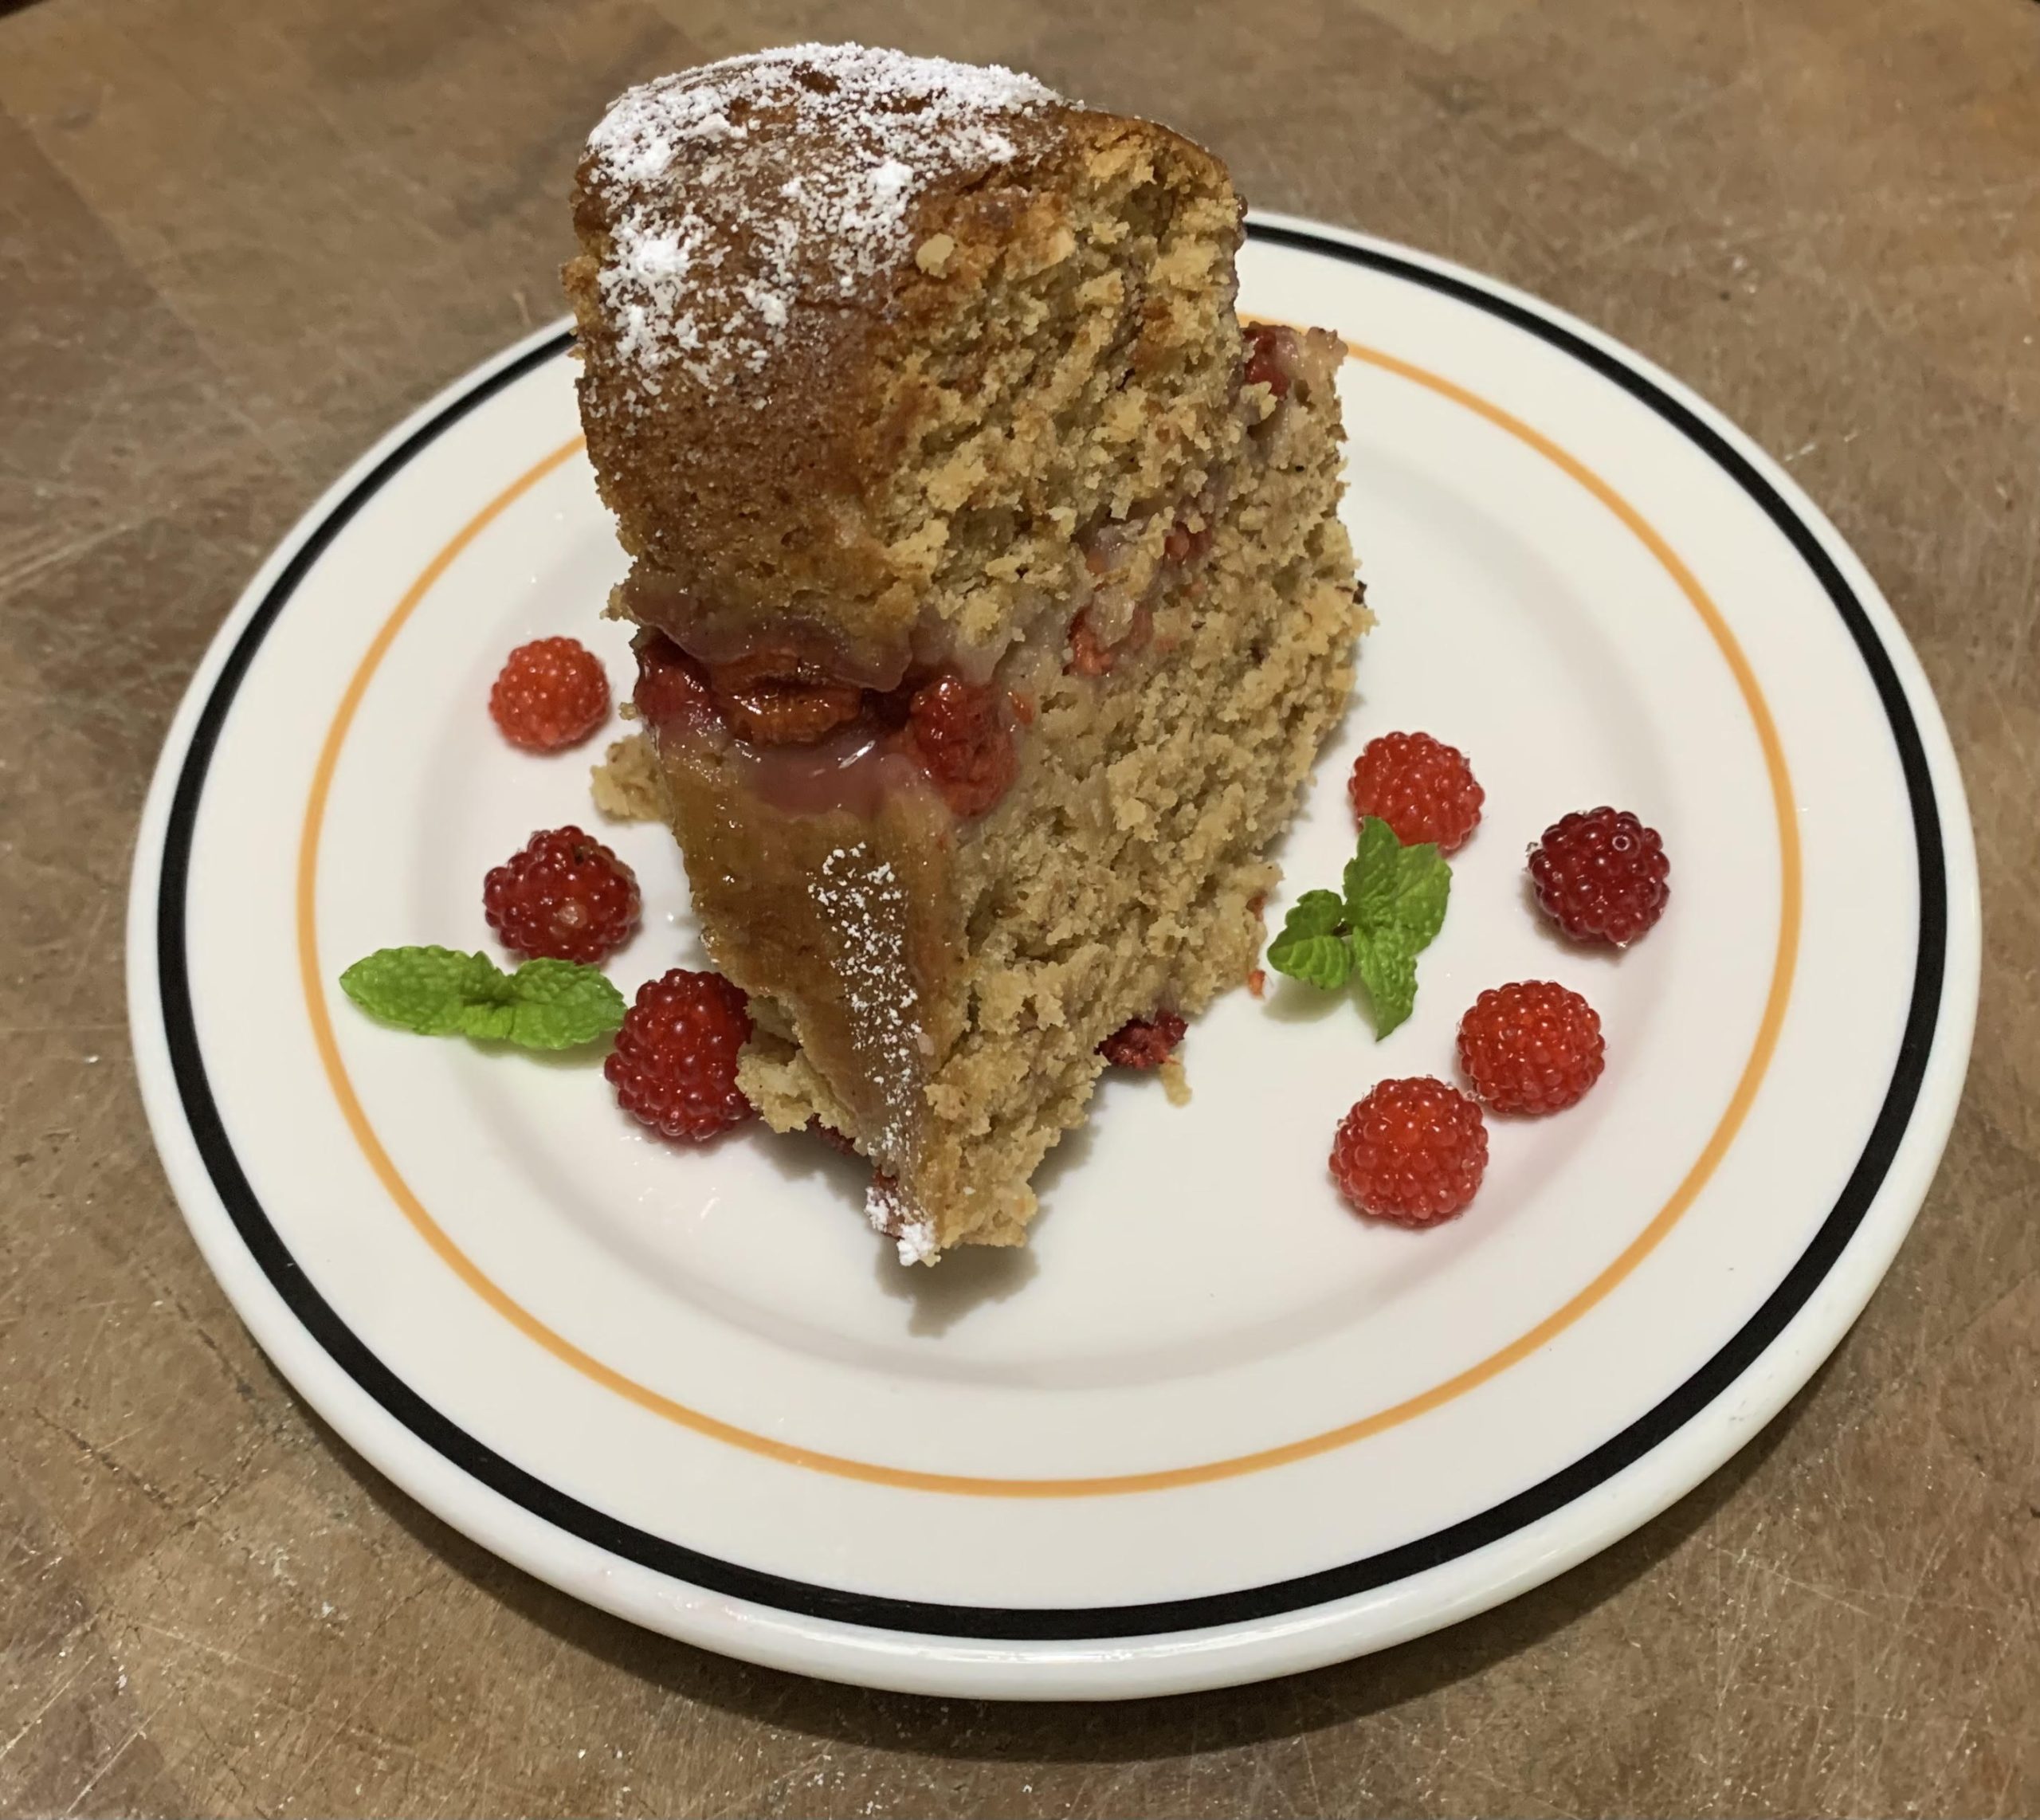 Slice of vegan raspberry cake on a plate with fresh raspberries scattered on the plate around it. Powdered sugar is sprinkled on the top.